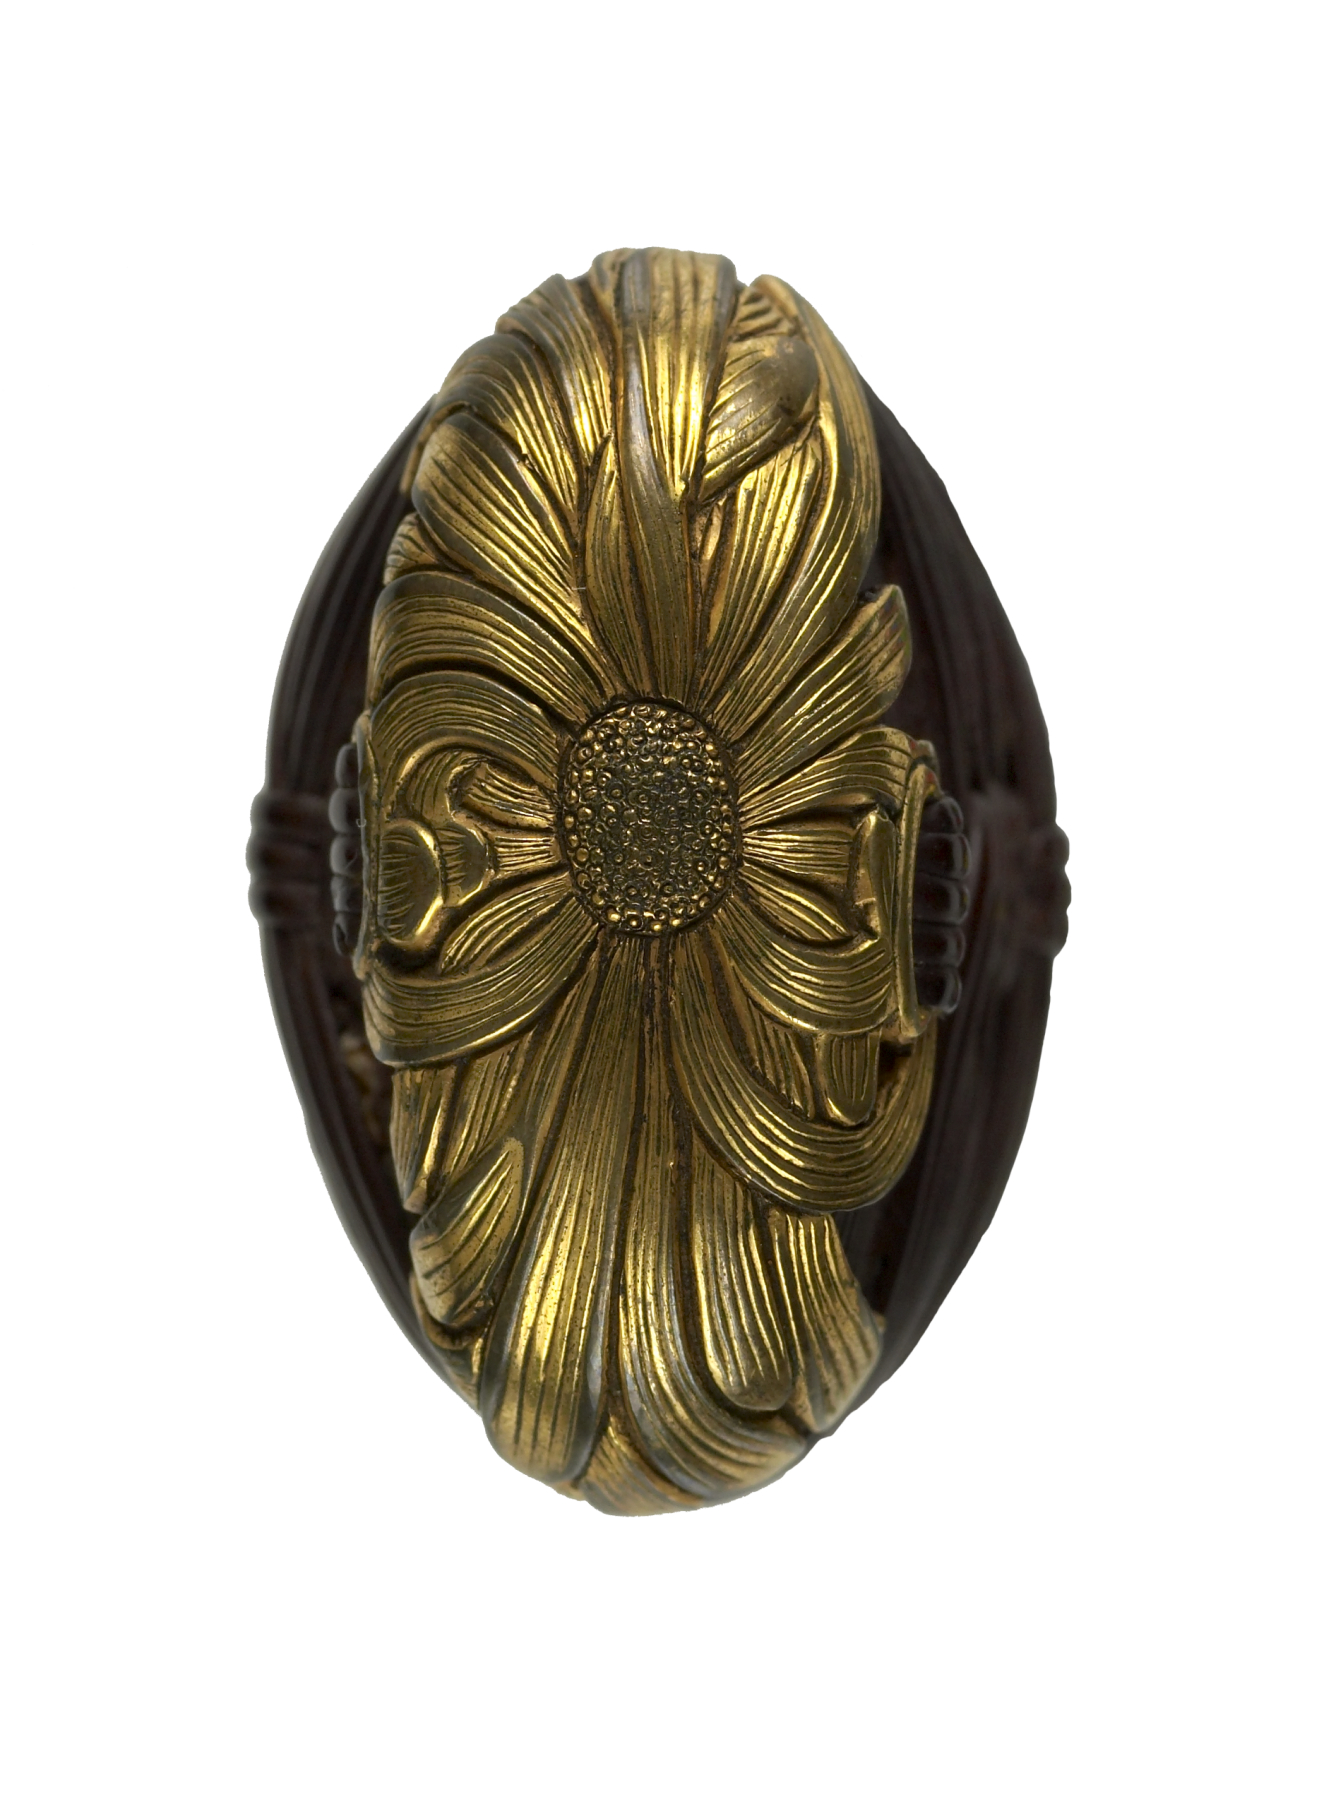 Image for Tsuka with Chrysanthemum